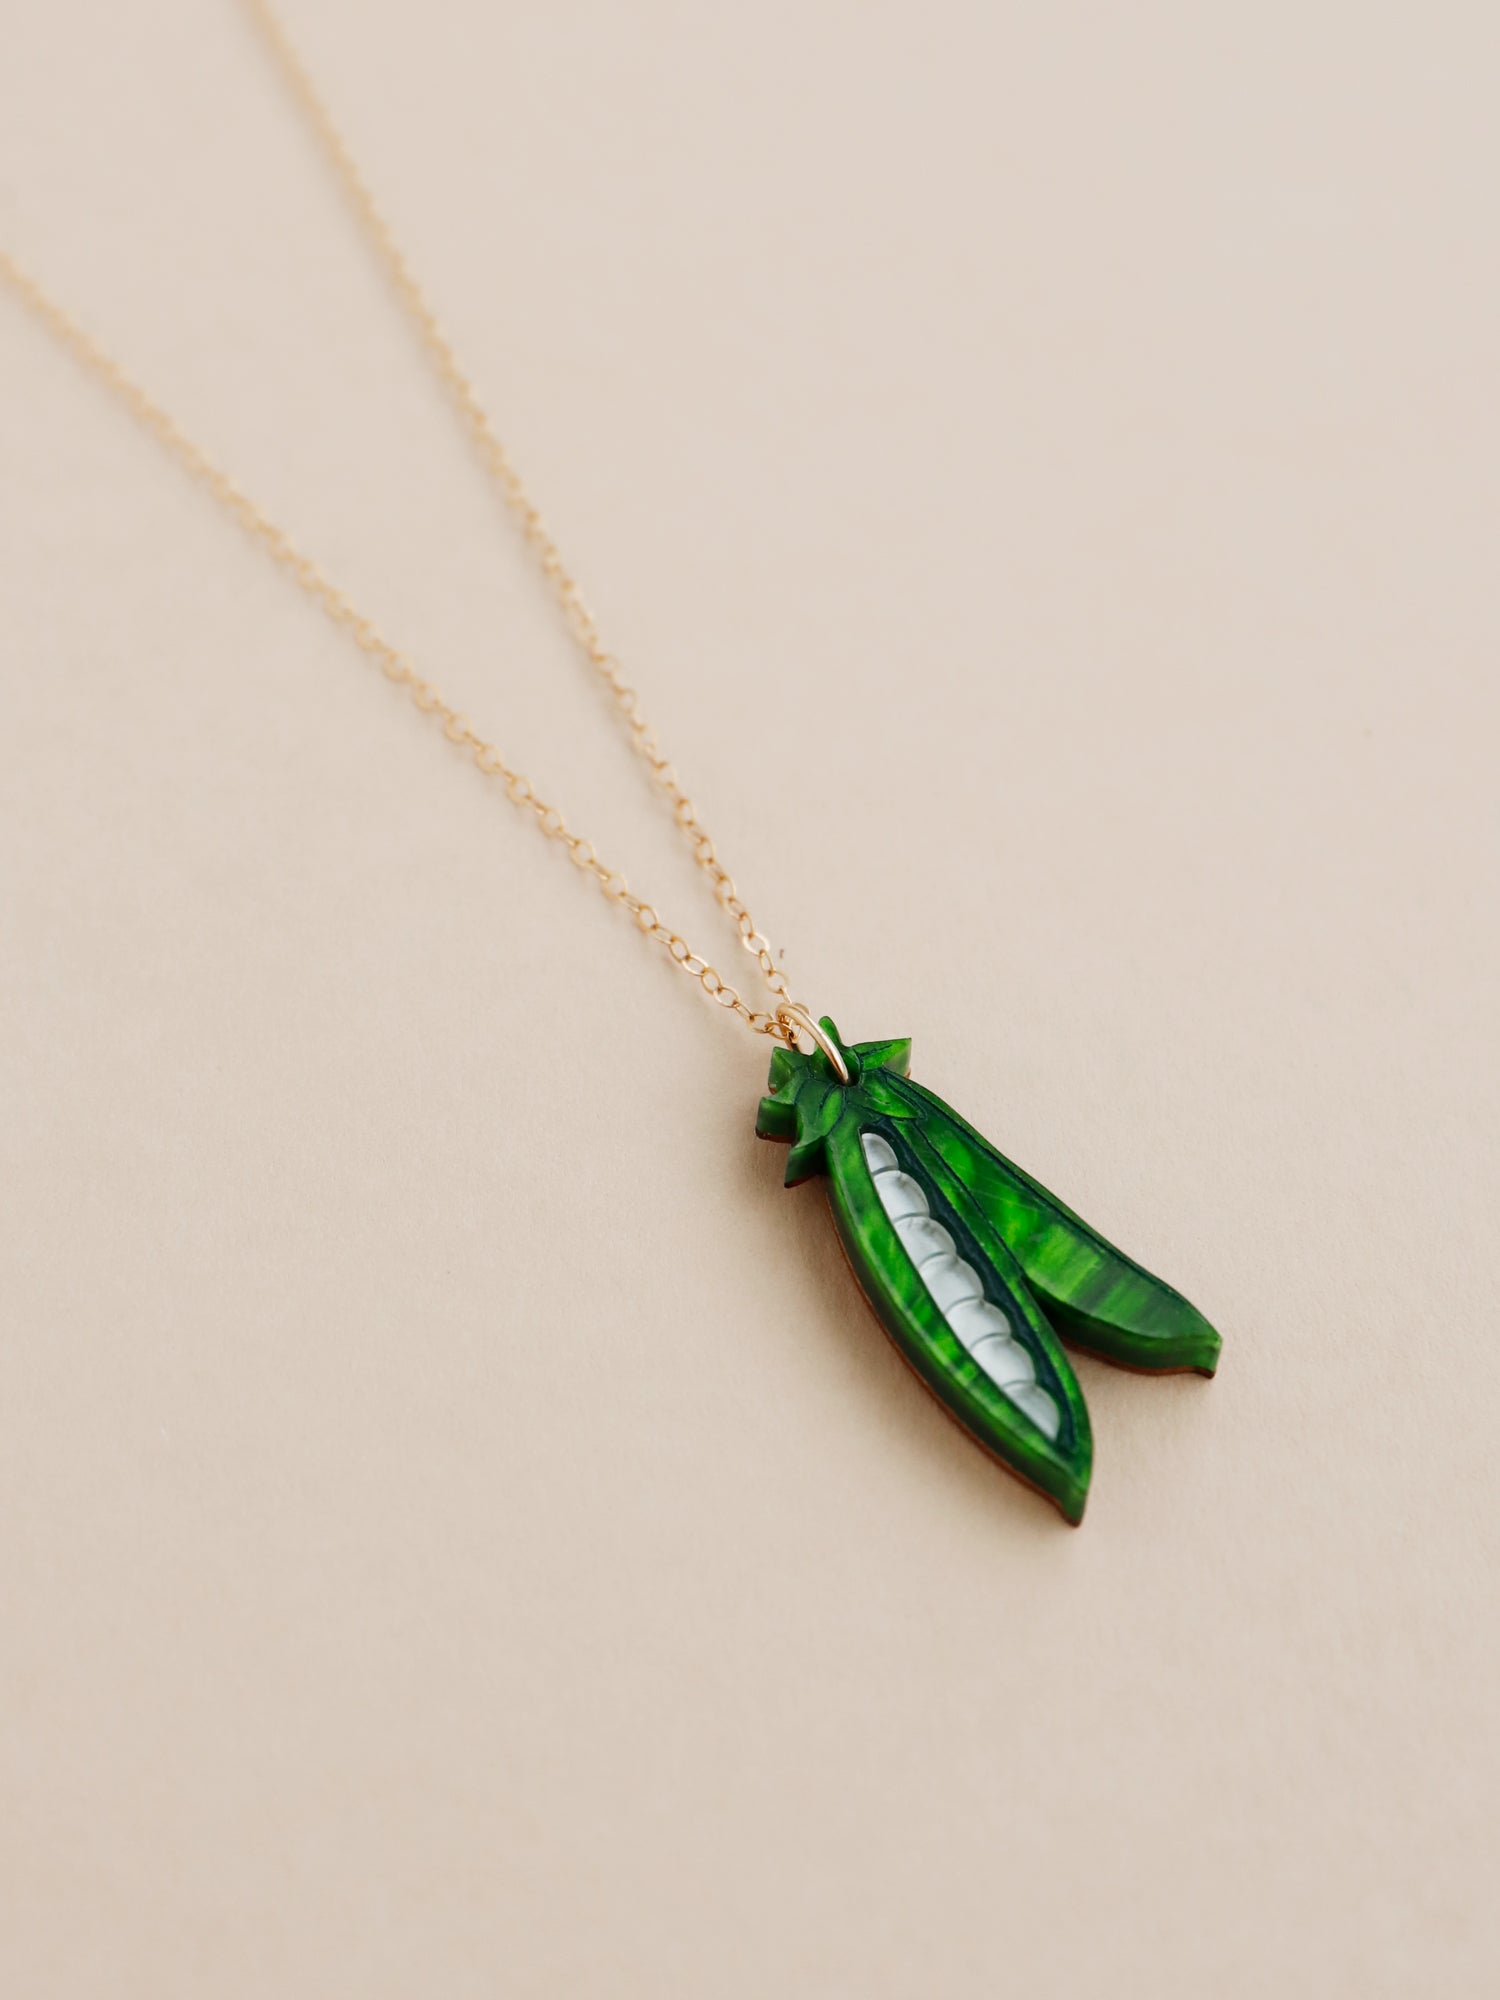 A playful peas in a pod pendant made from marbled acrylic and wood with an optional 14k gold-filled chain. Handmade in London by Wolf & Moon.